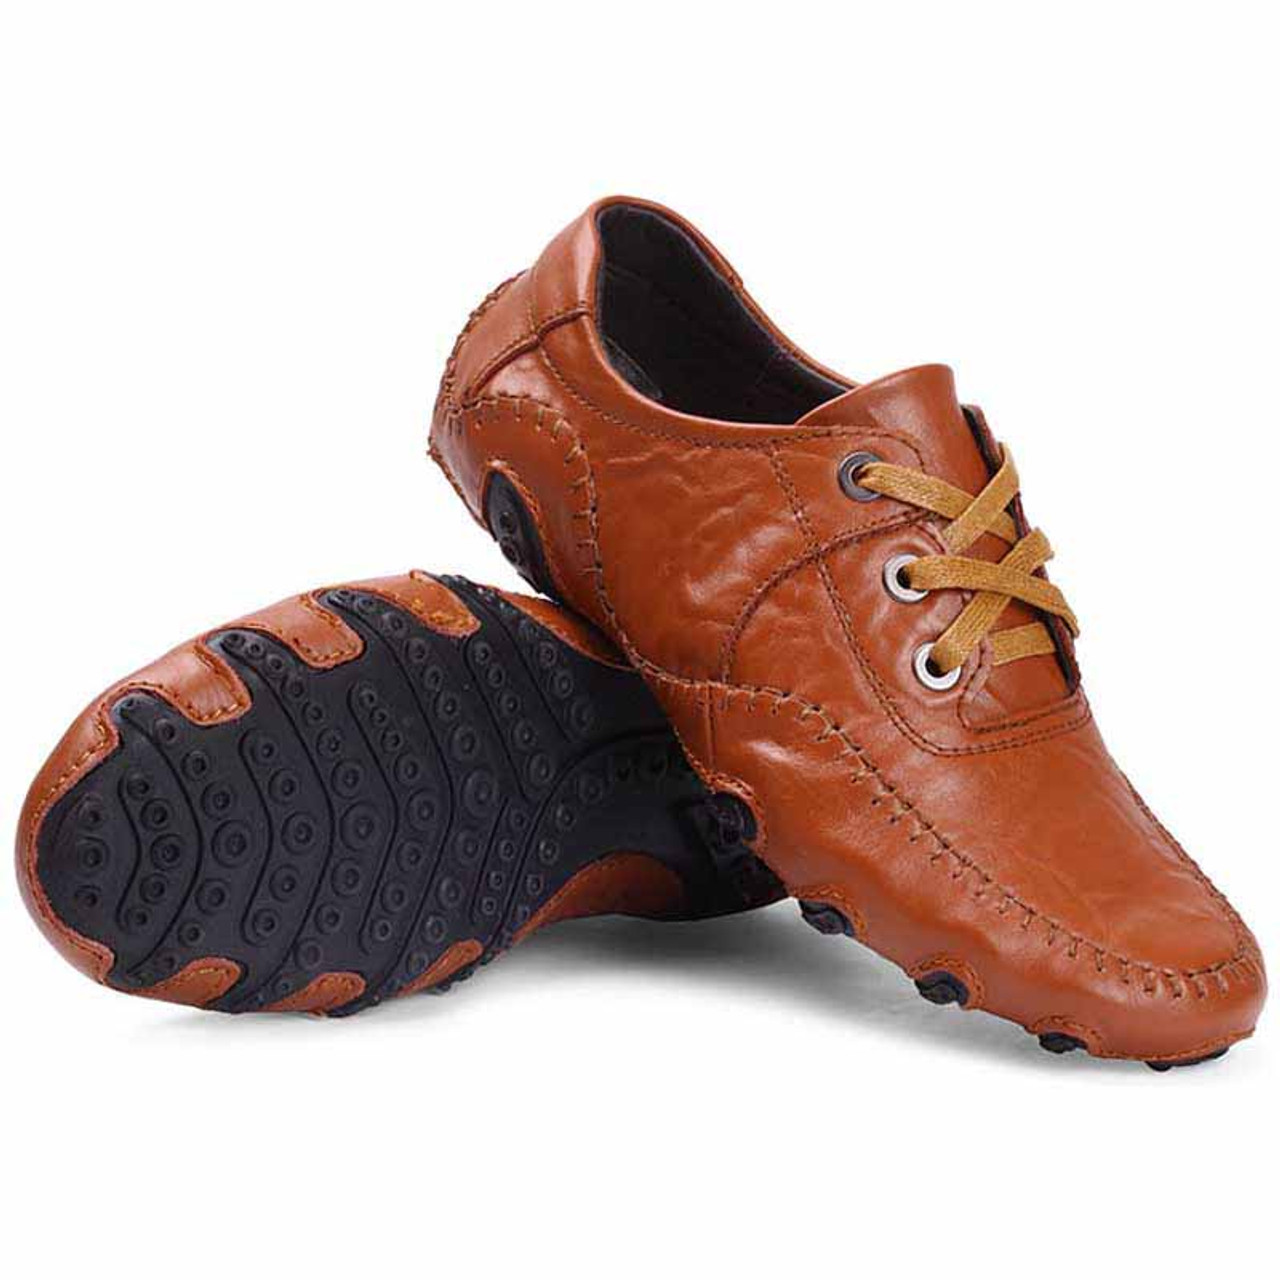 Brown classic casual leather lace up shoe | Mens lace ups online 1308MS